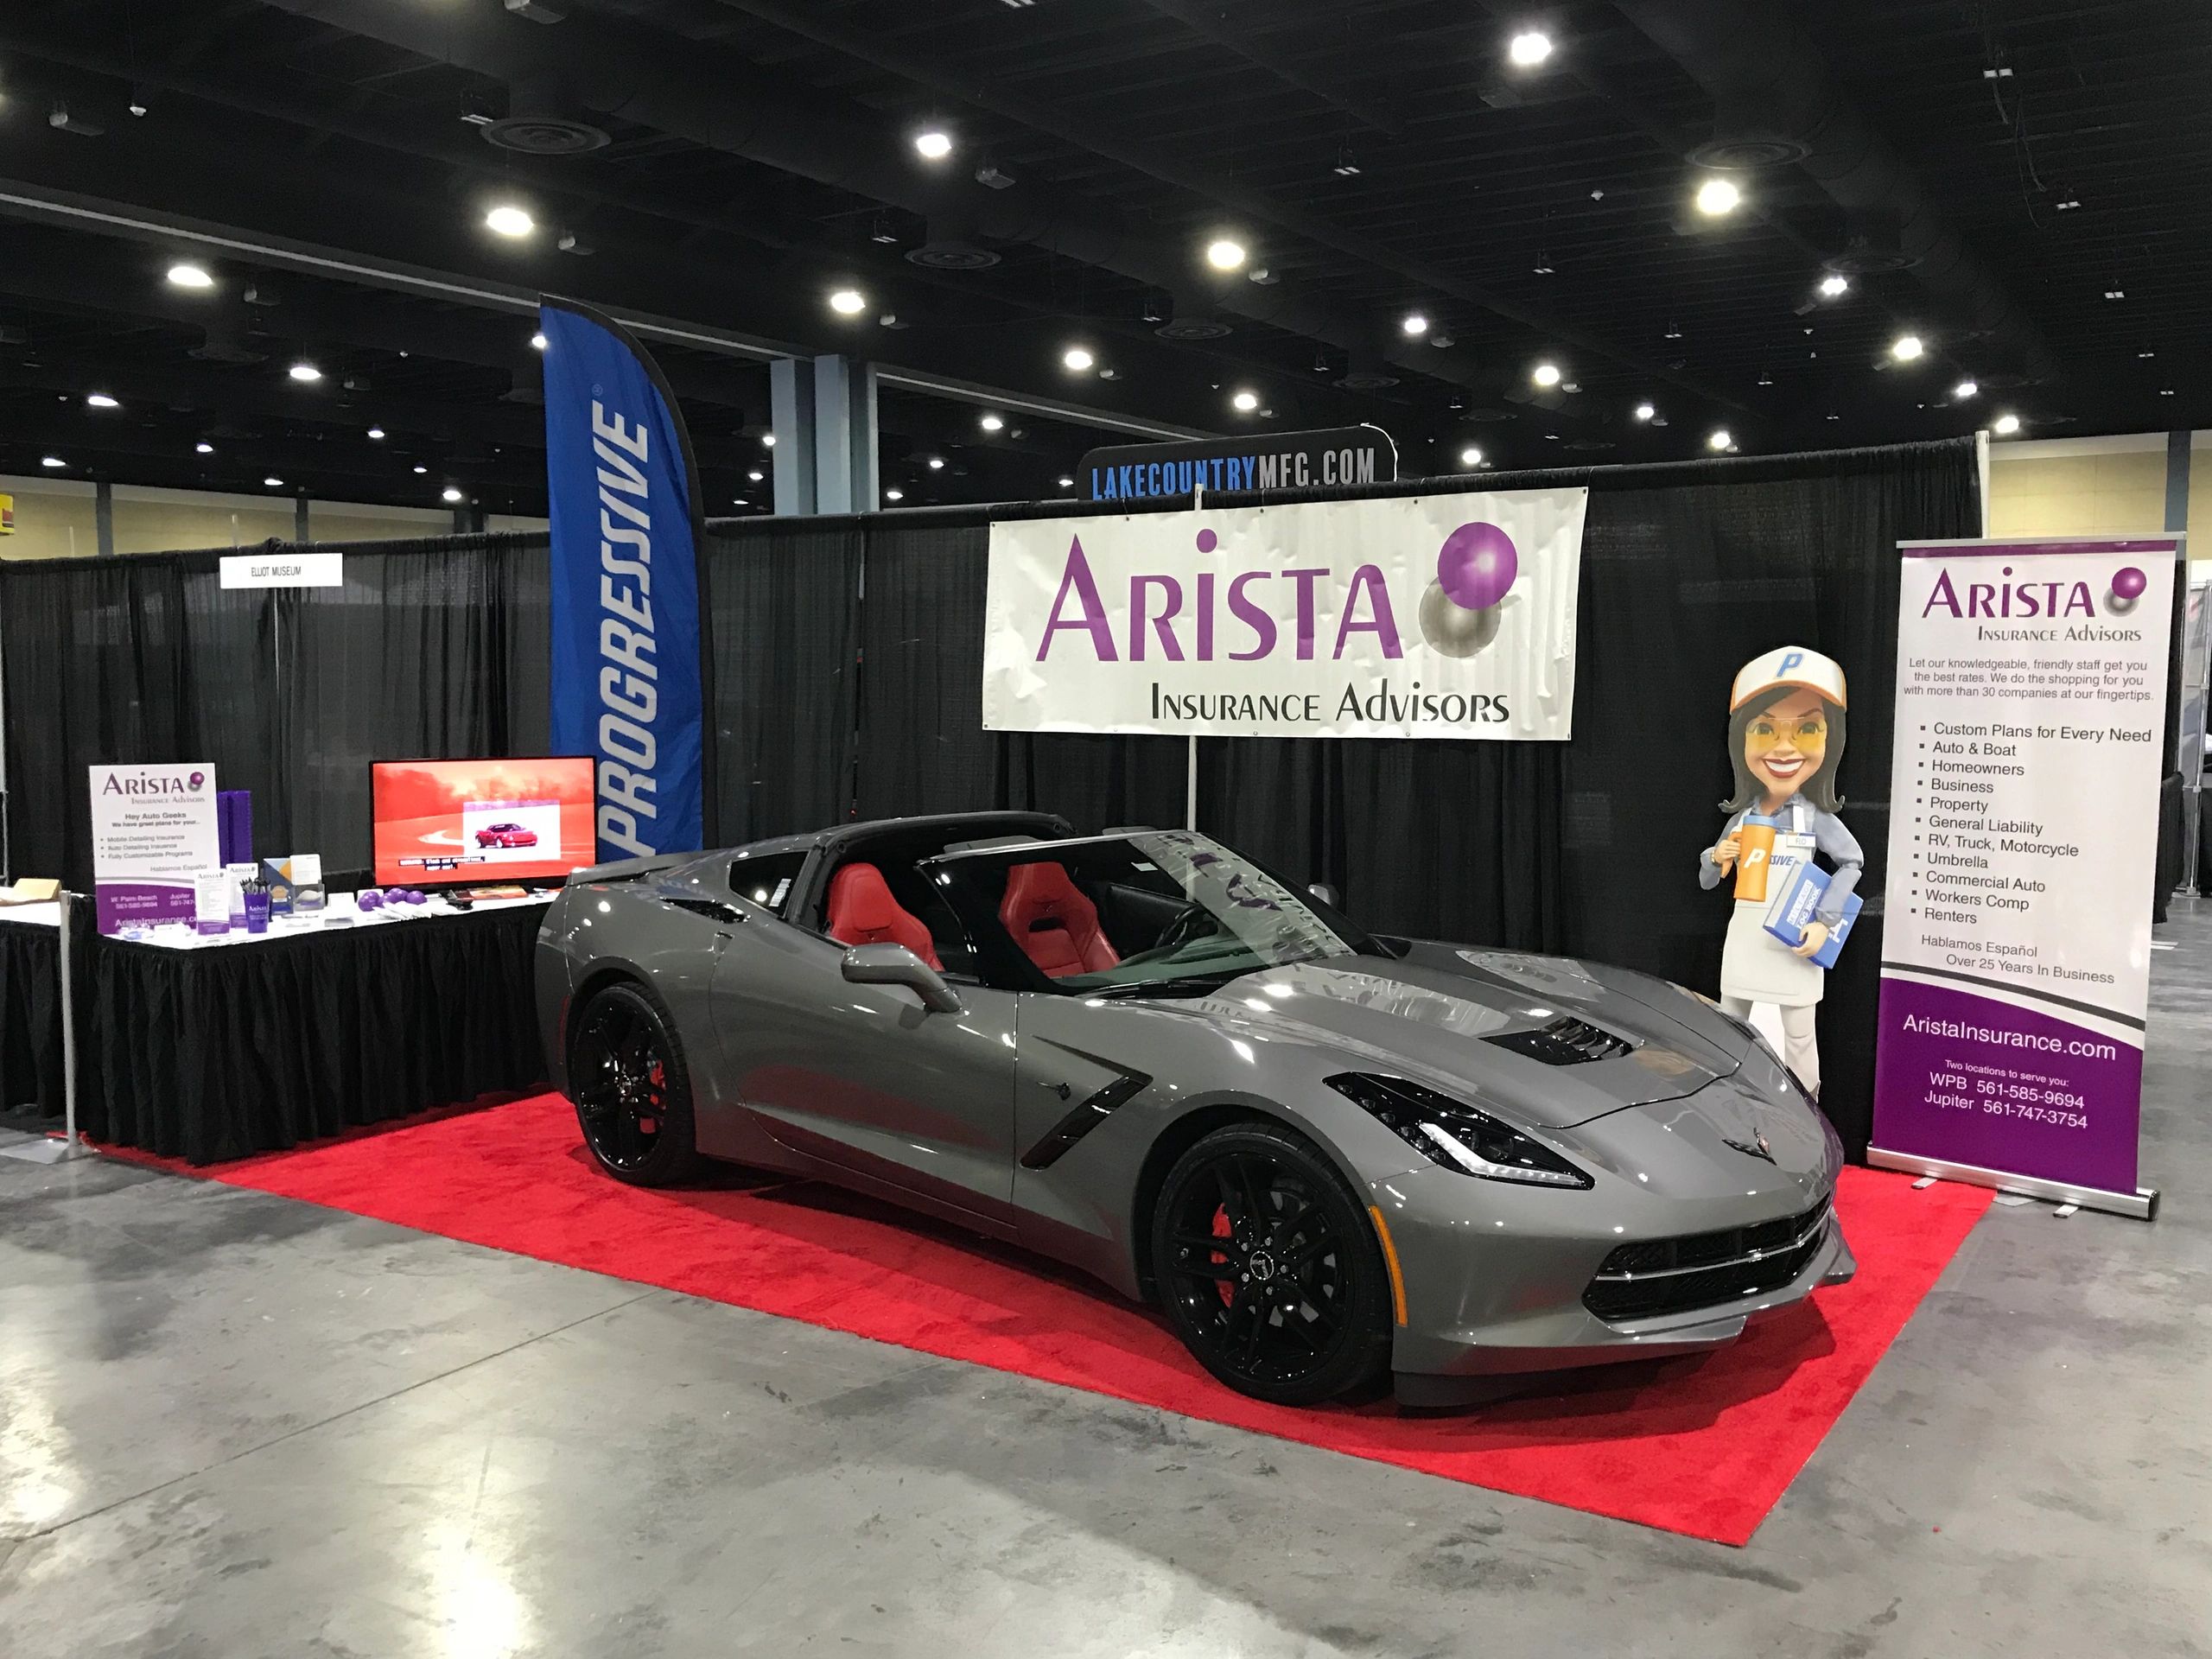 A gray Corvette Stingray in an Autoshow booth with an Arista Insurance Advisors banner